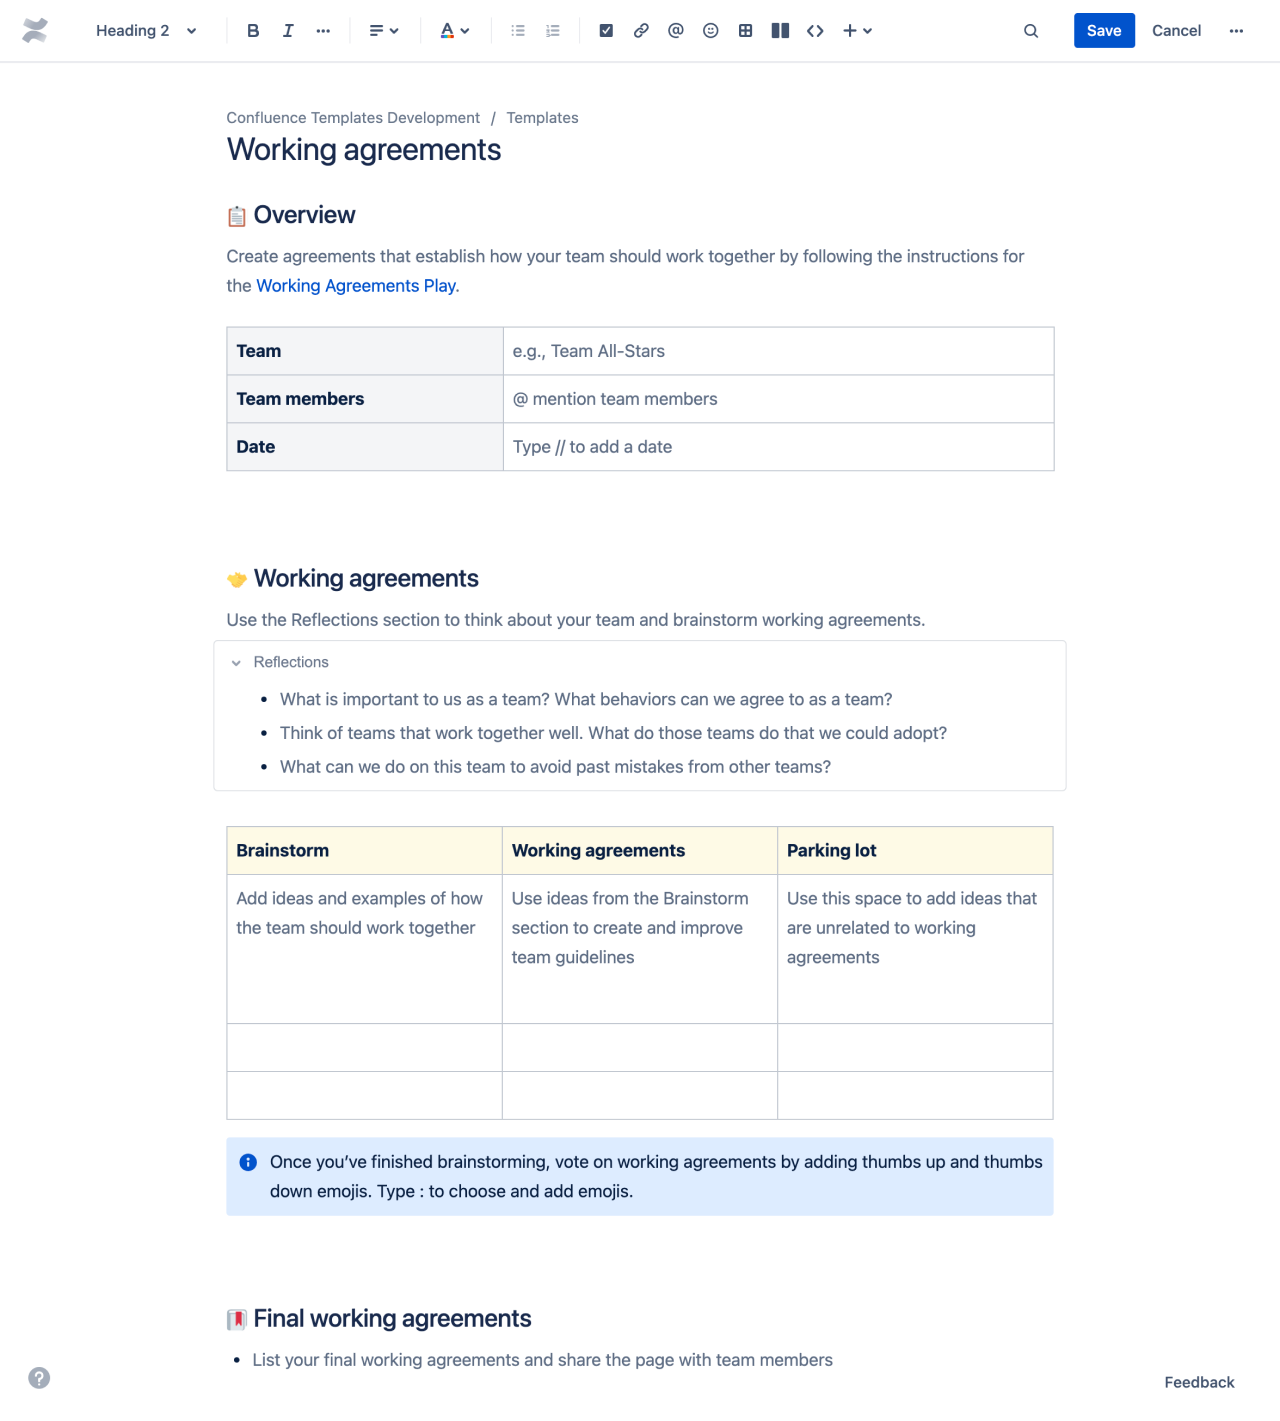 Working agreements template